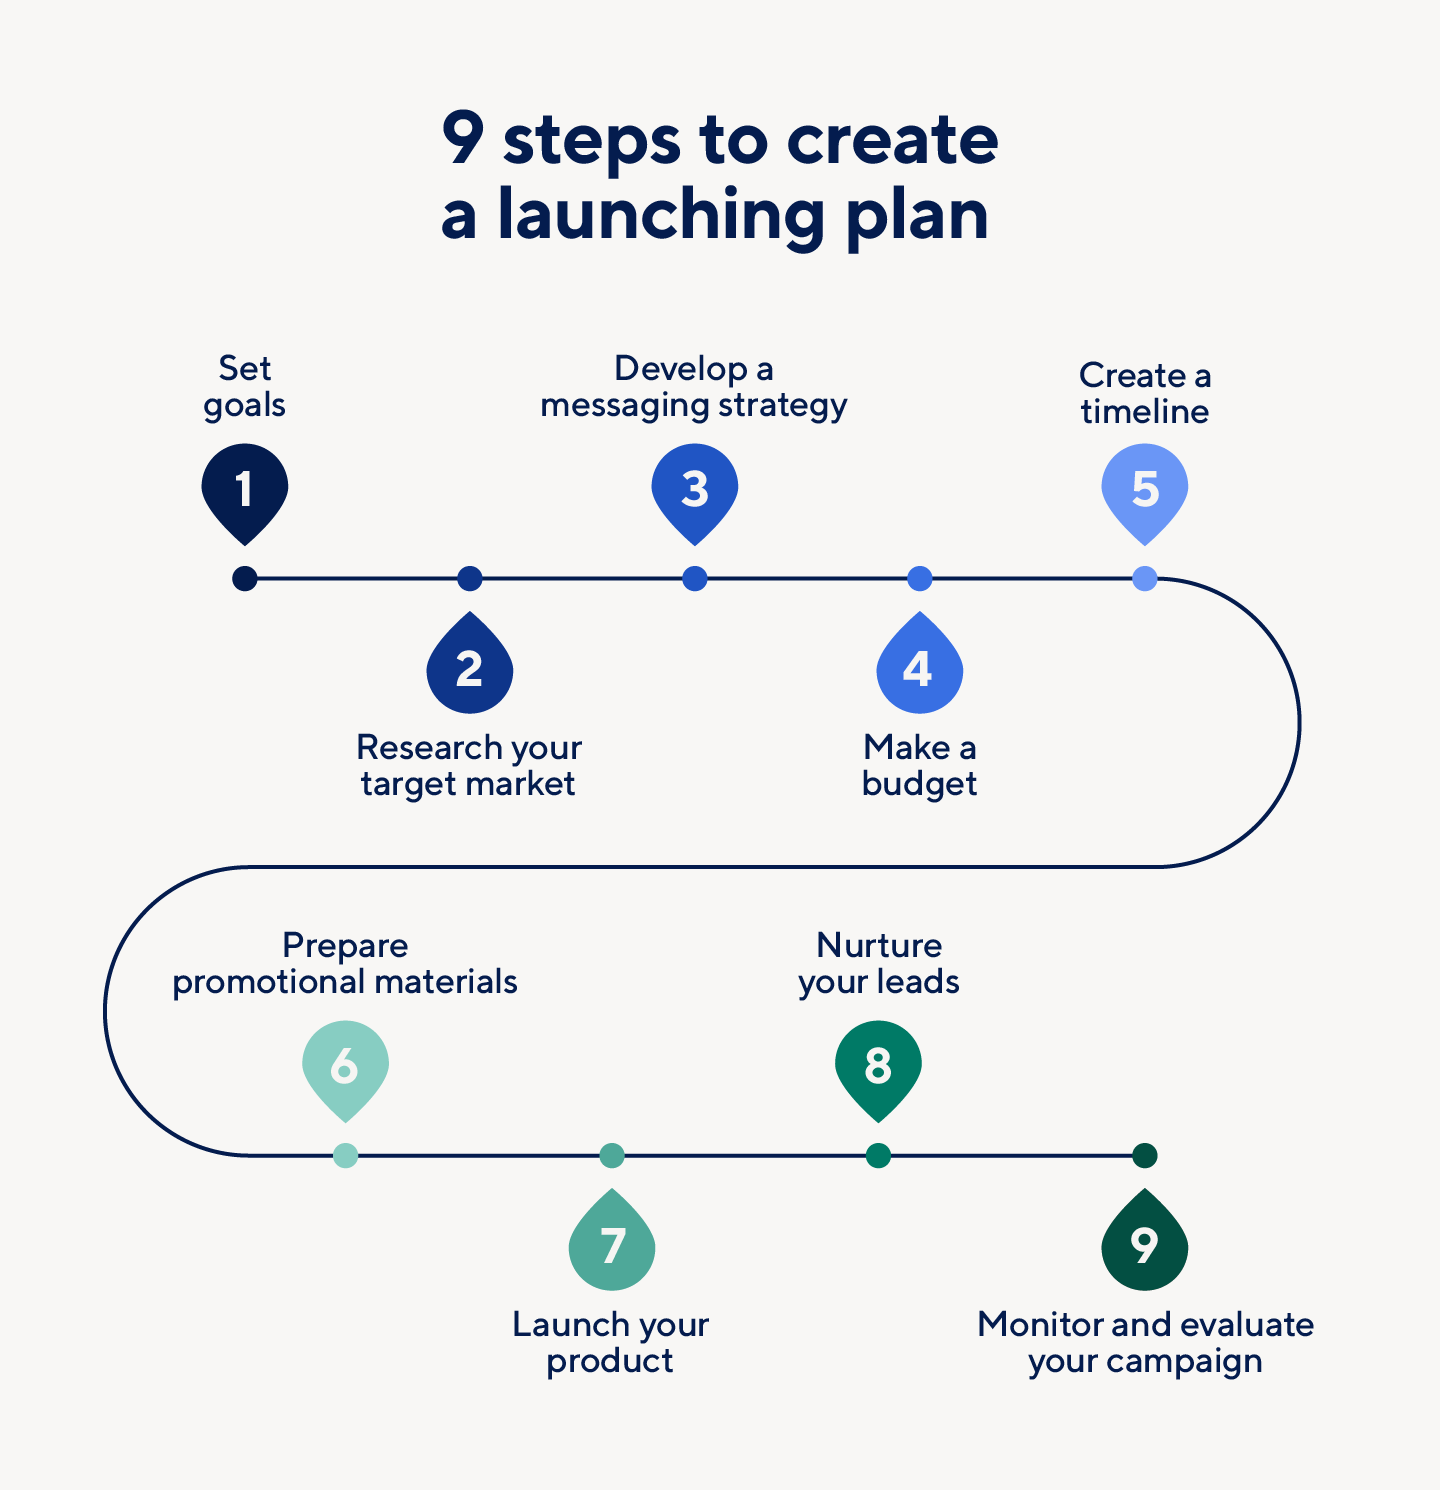 9 steps to create a launching plan